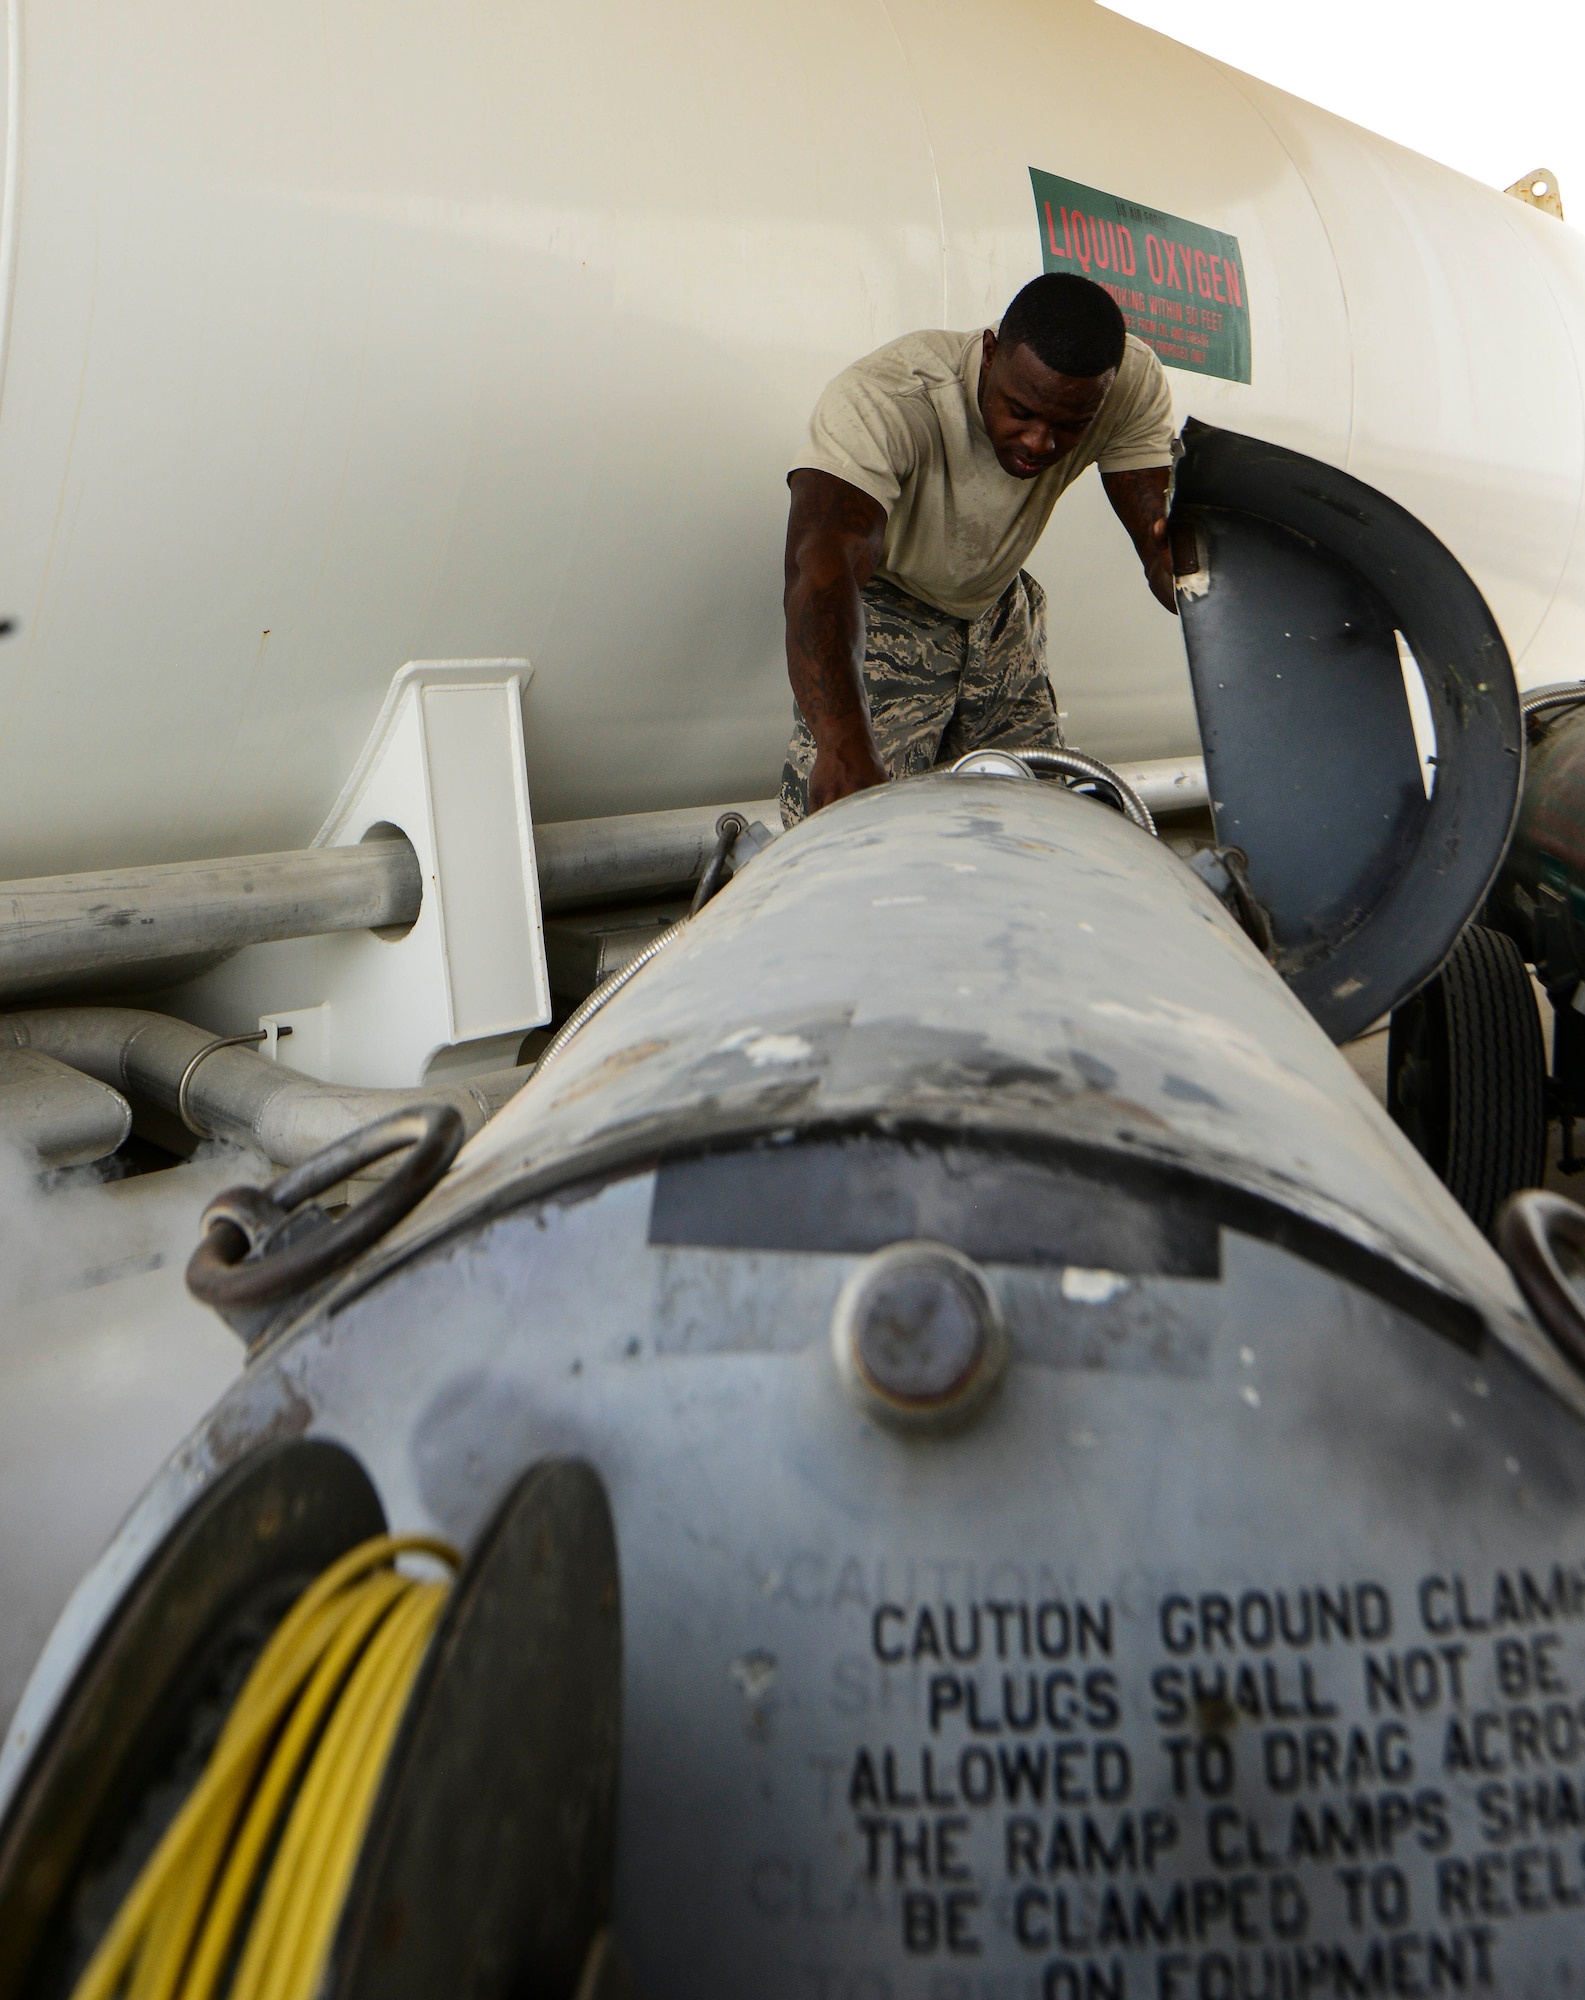 Tech. Sgt. Alexander Sasser, 379th Expeditionary Logistics Readiness Squadron fuels cryogenics NCO in charge, levels out the gauge to ensure the right amount of pressure is in a 50-gallon liquid oxygen tank during an inspection Aug. 5, 2016, at Al Udeid Air Base, Qatar. The cryogenics team here produces liquid oxygen, which is primarily used as aviator breathing oxygen, and liquid nitrogen, which is used for tire pressure and medical purposes. (U.S. Air Force photo/Senior Airman Janelle Patiño/Released)